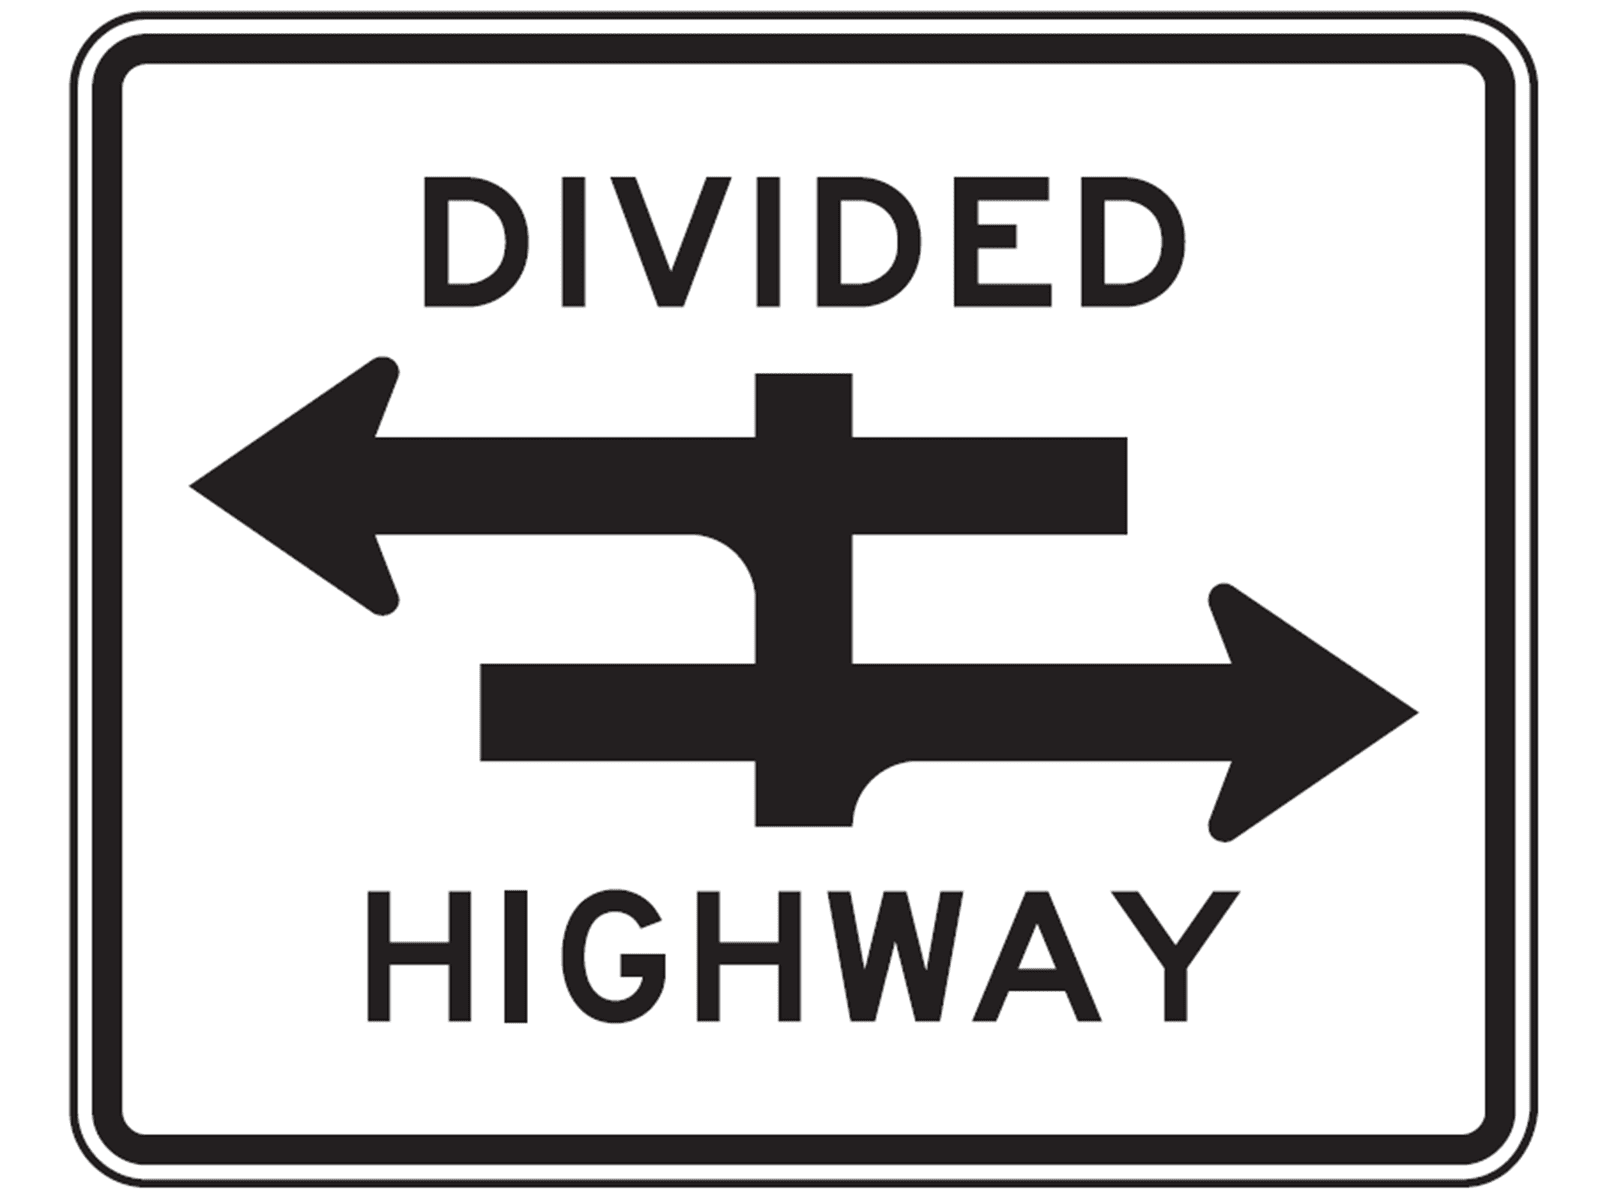 R6-3 R6-3 - R6: One Way and Divided Highway